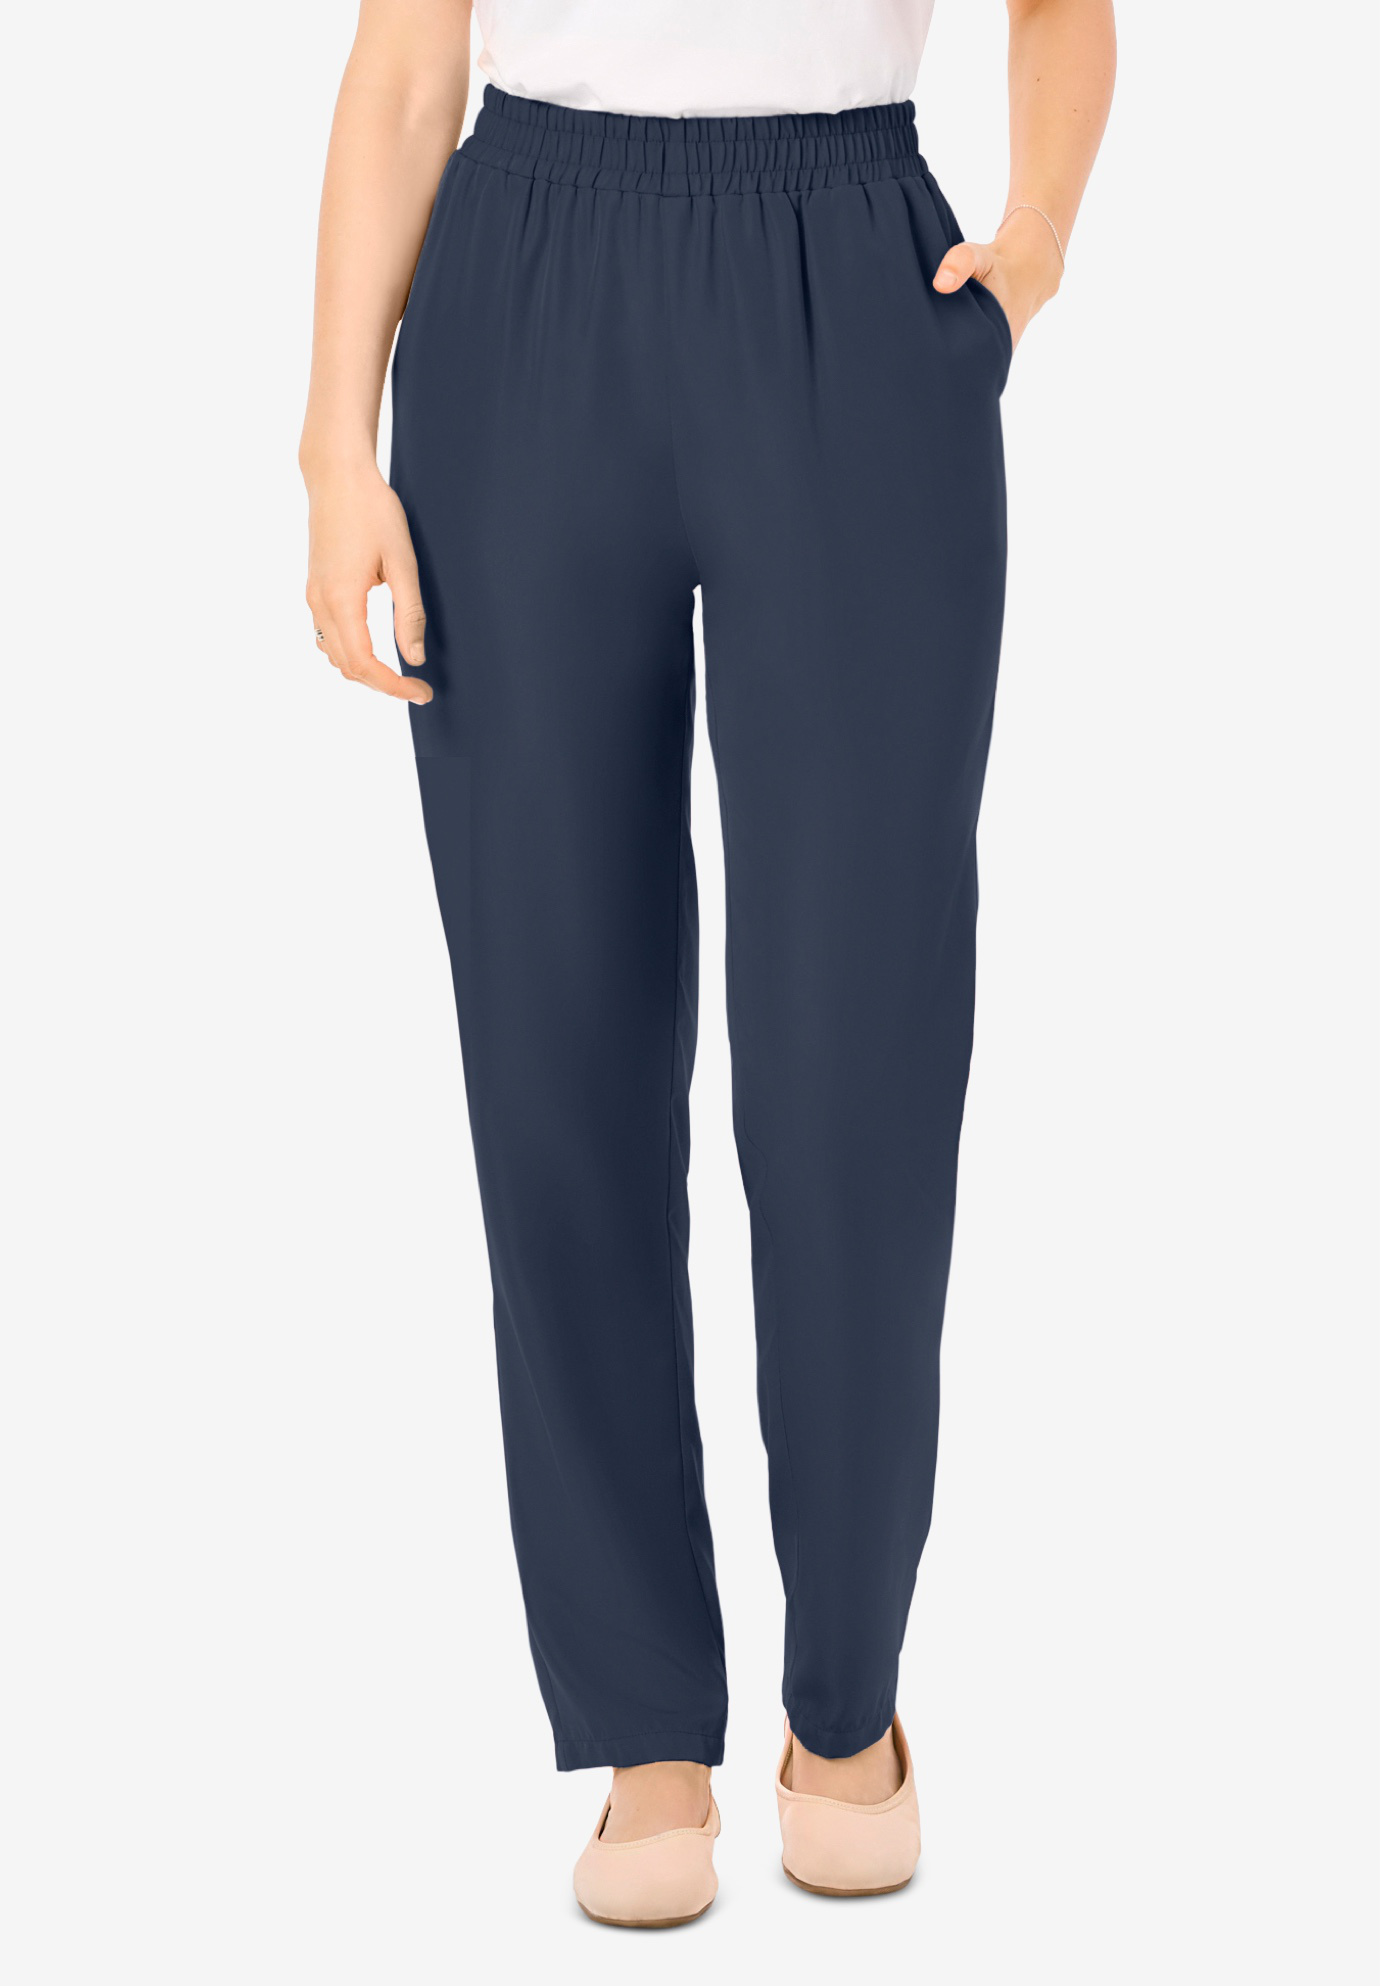 Hassle Free Woven Pant | Woman Within